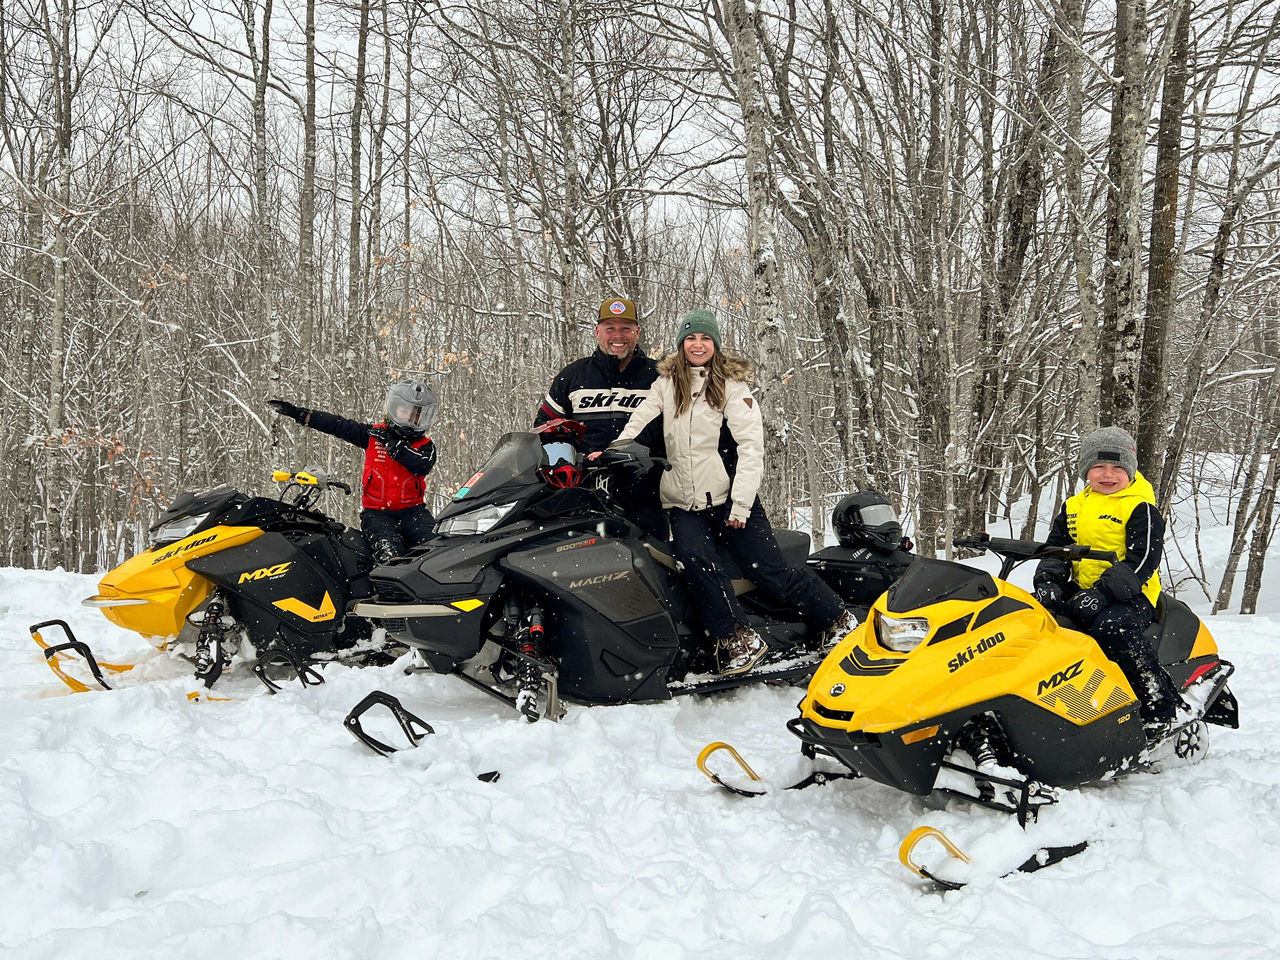 Troy Oleson with his family on their Ski-Doo snowmobiles